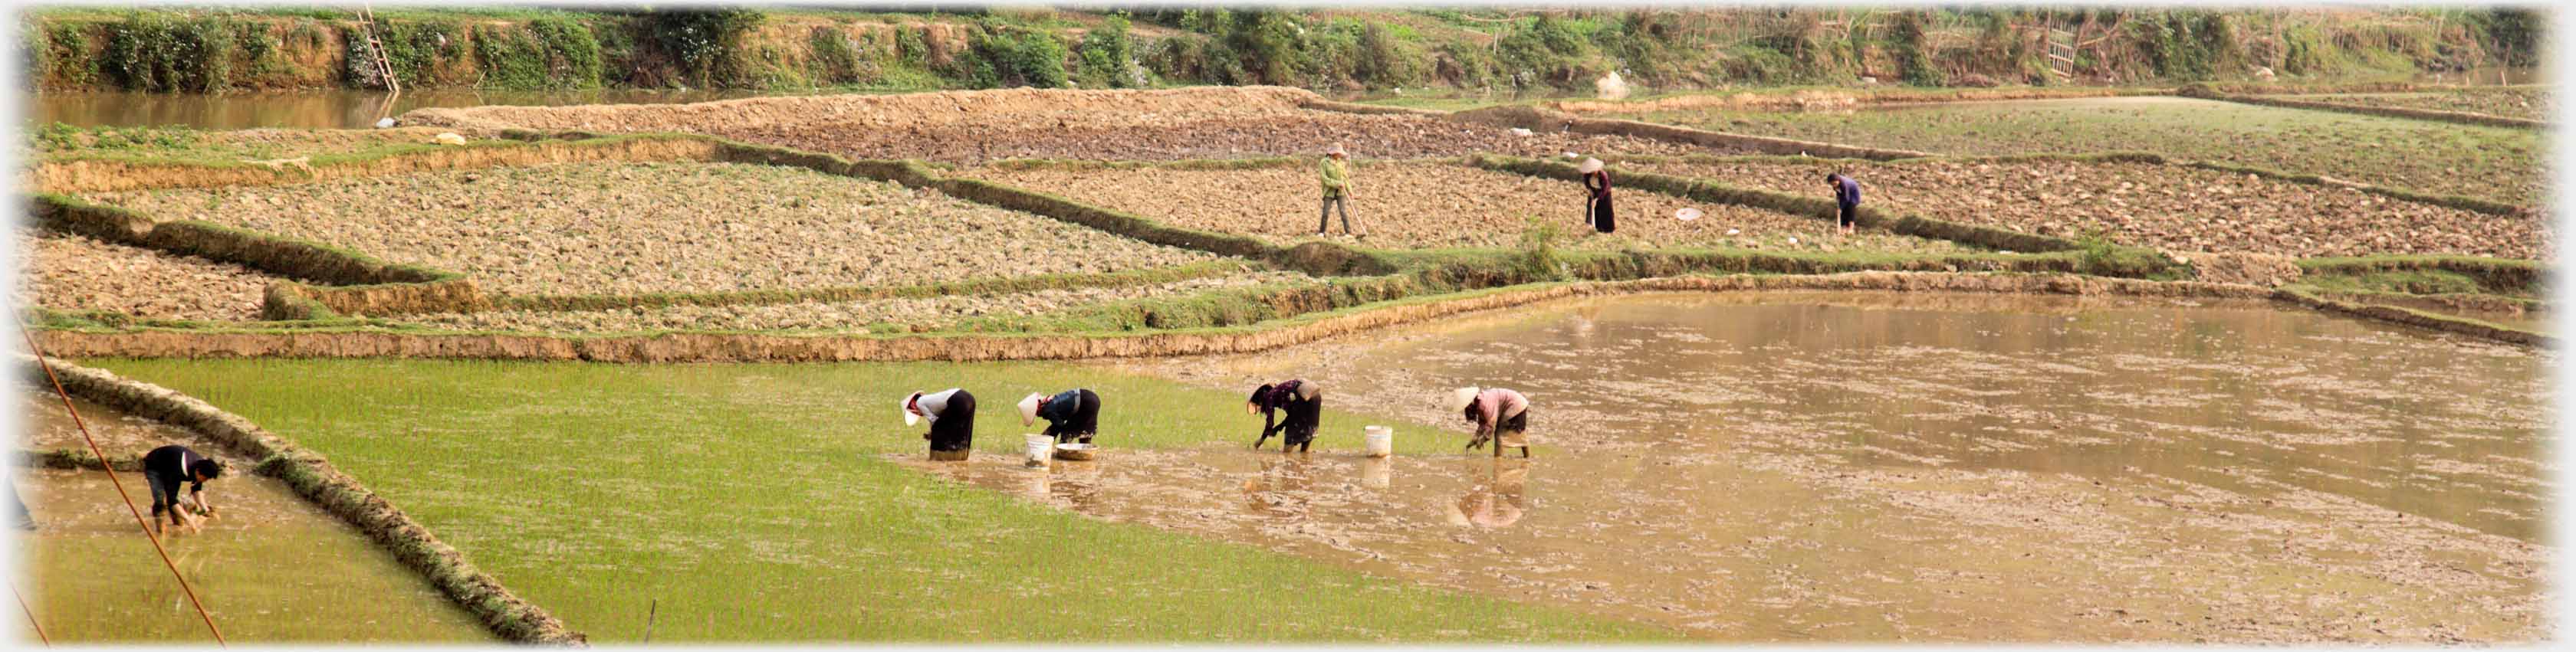 Four women planting at edge of green area of field.